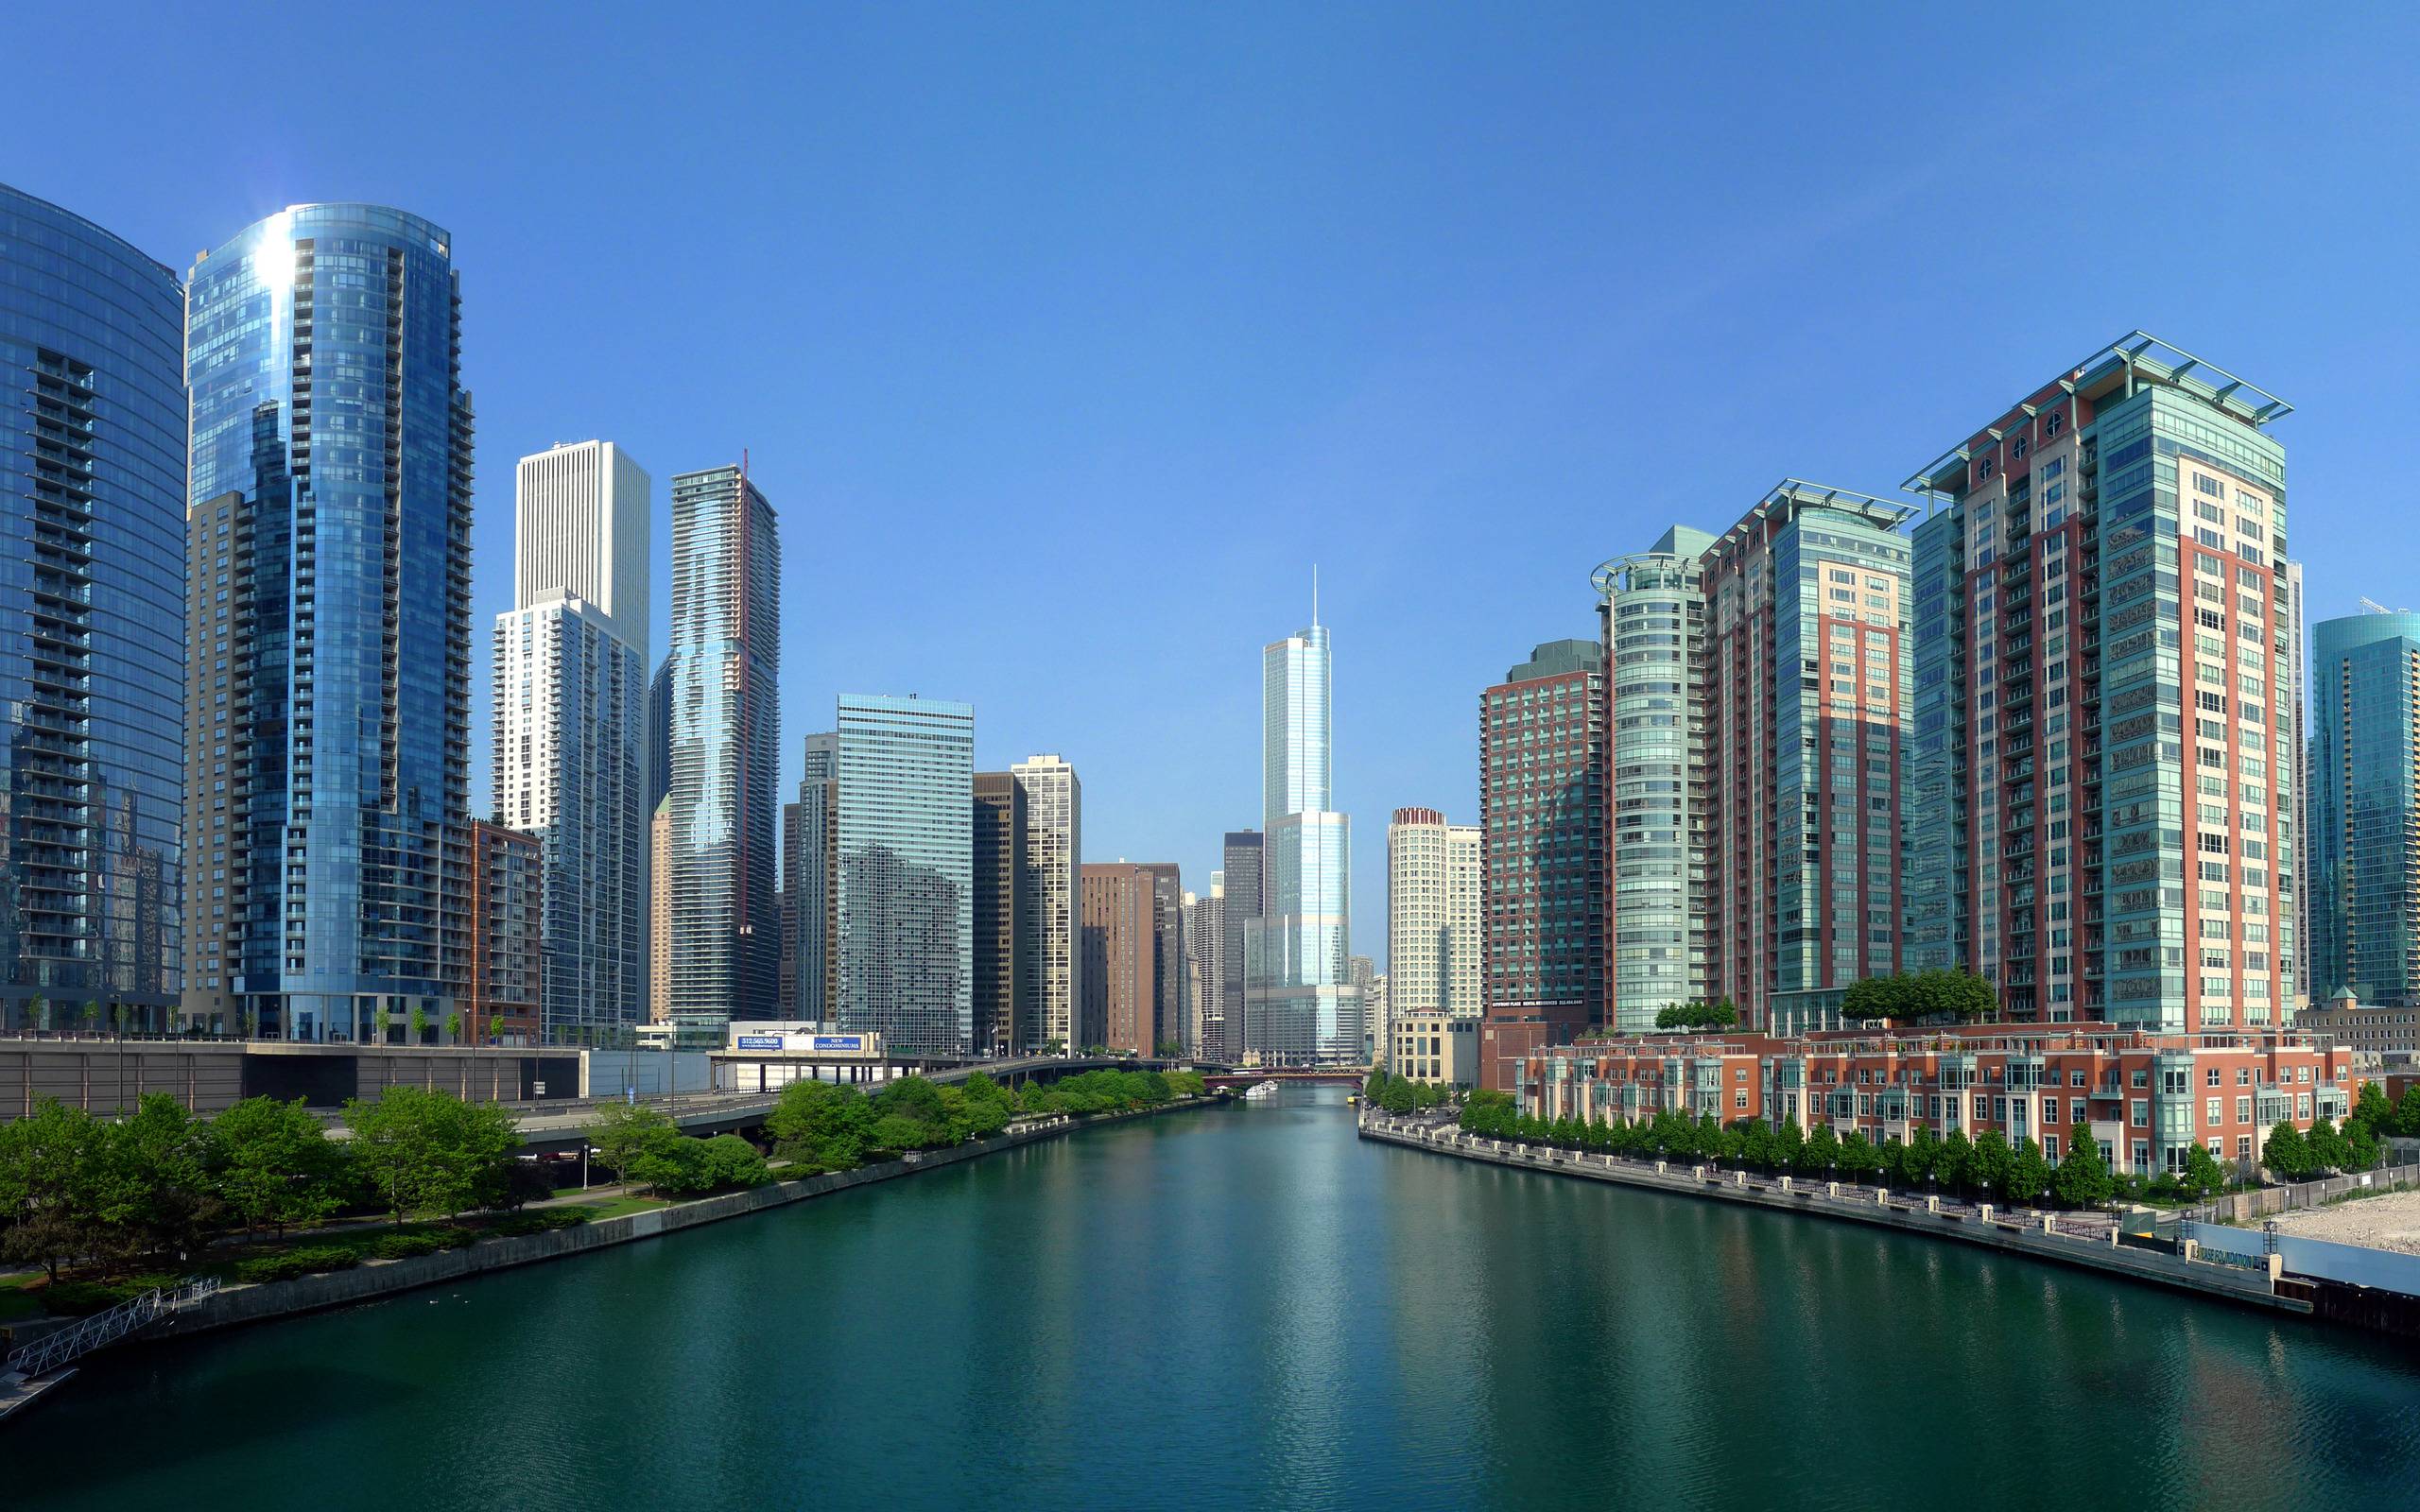 Panorama of Chicago wallpaper and image, picture